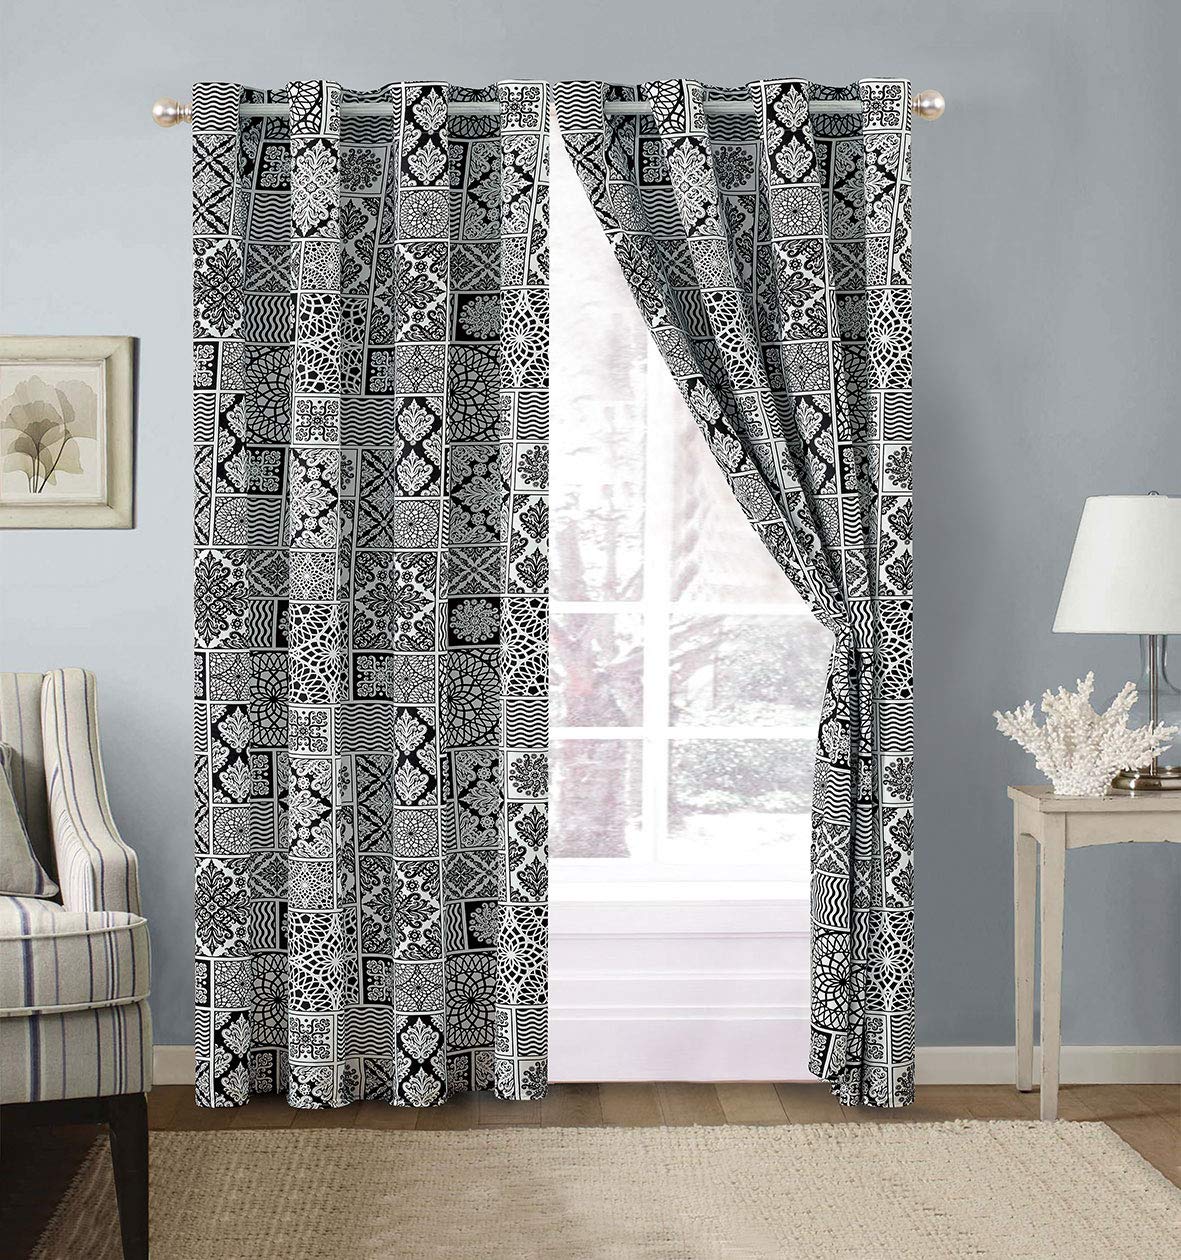 Book Cover Modern 2 - Piece Printed Grommet Curtain Set Drapes/Window Panels 108 inch Wide X 84 inch Long (Black, White, White, Lattice) 84 in (Tall) Black, White, Off White, Lattice